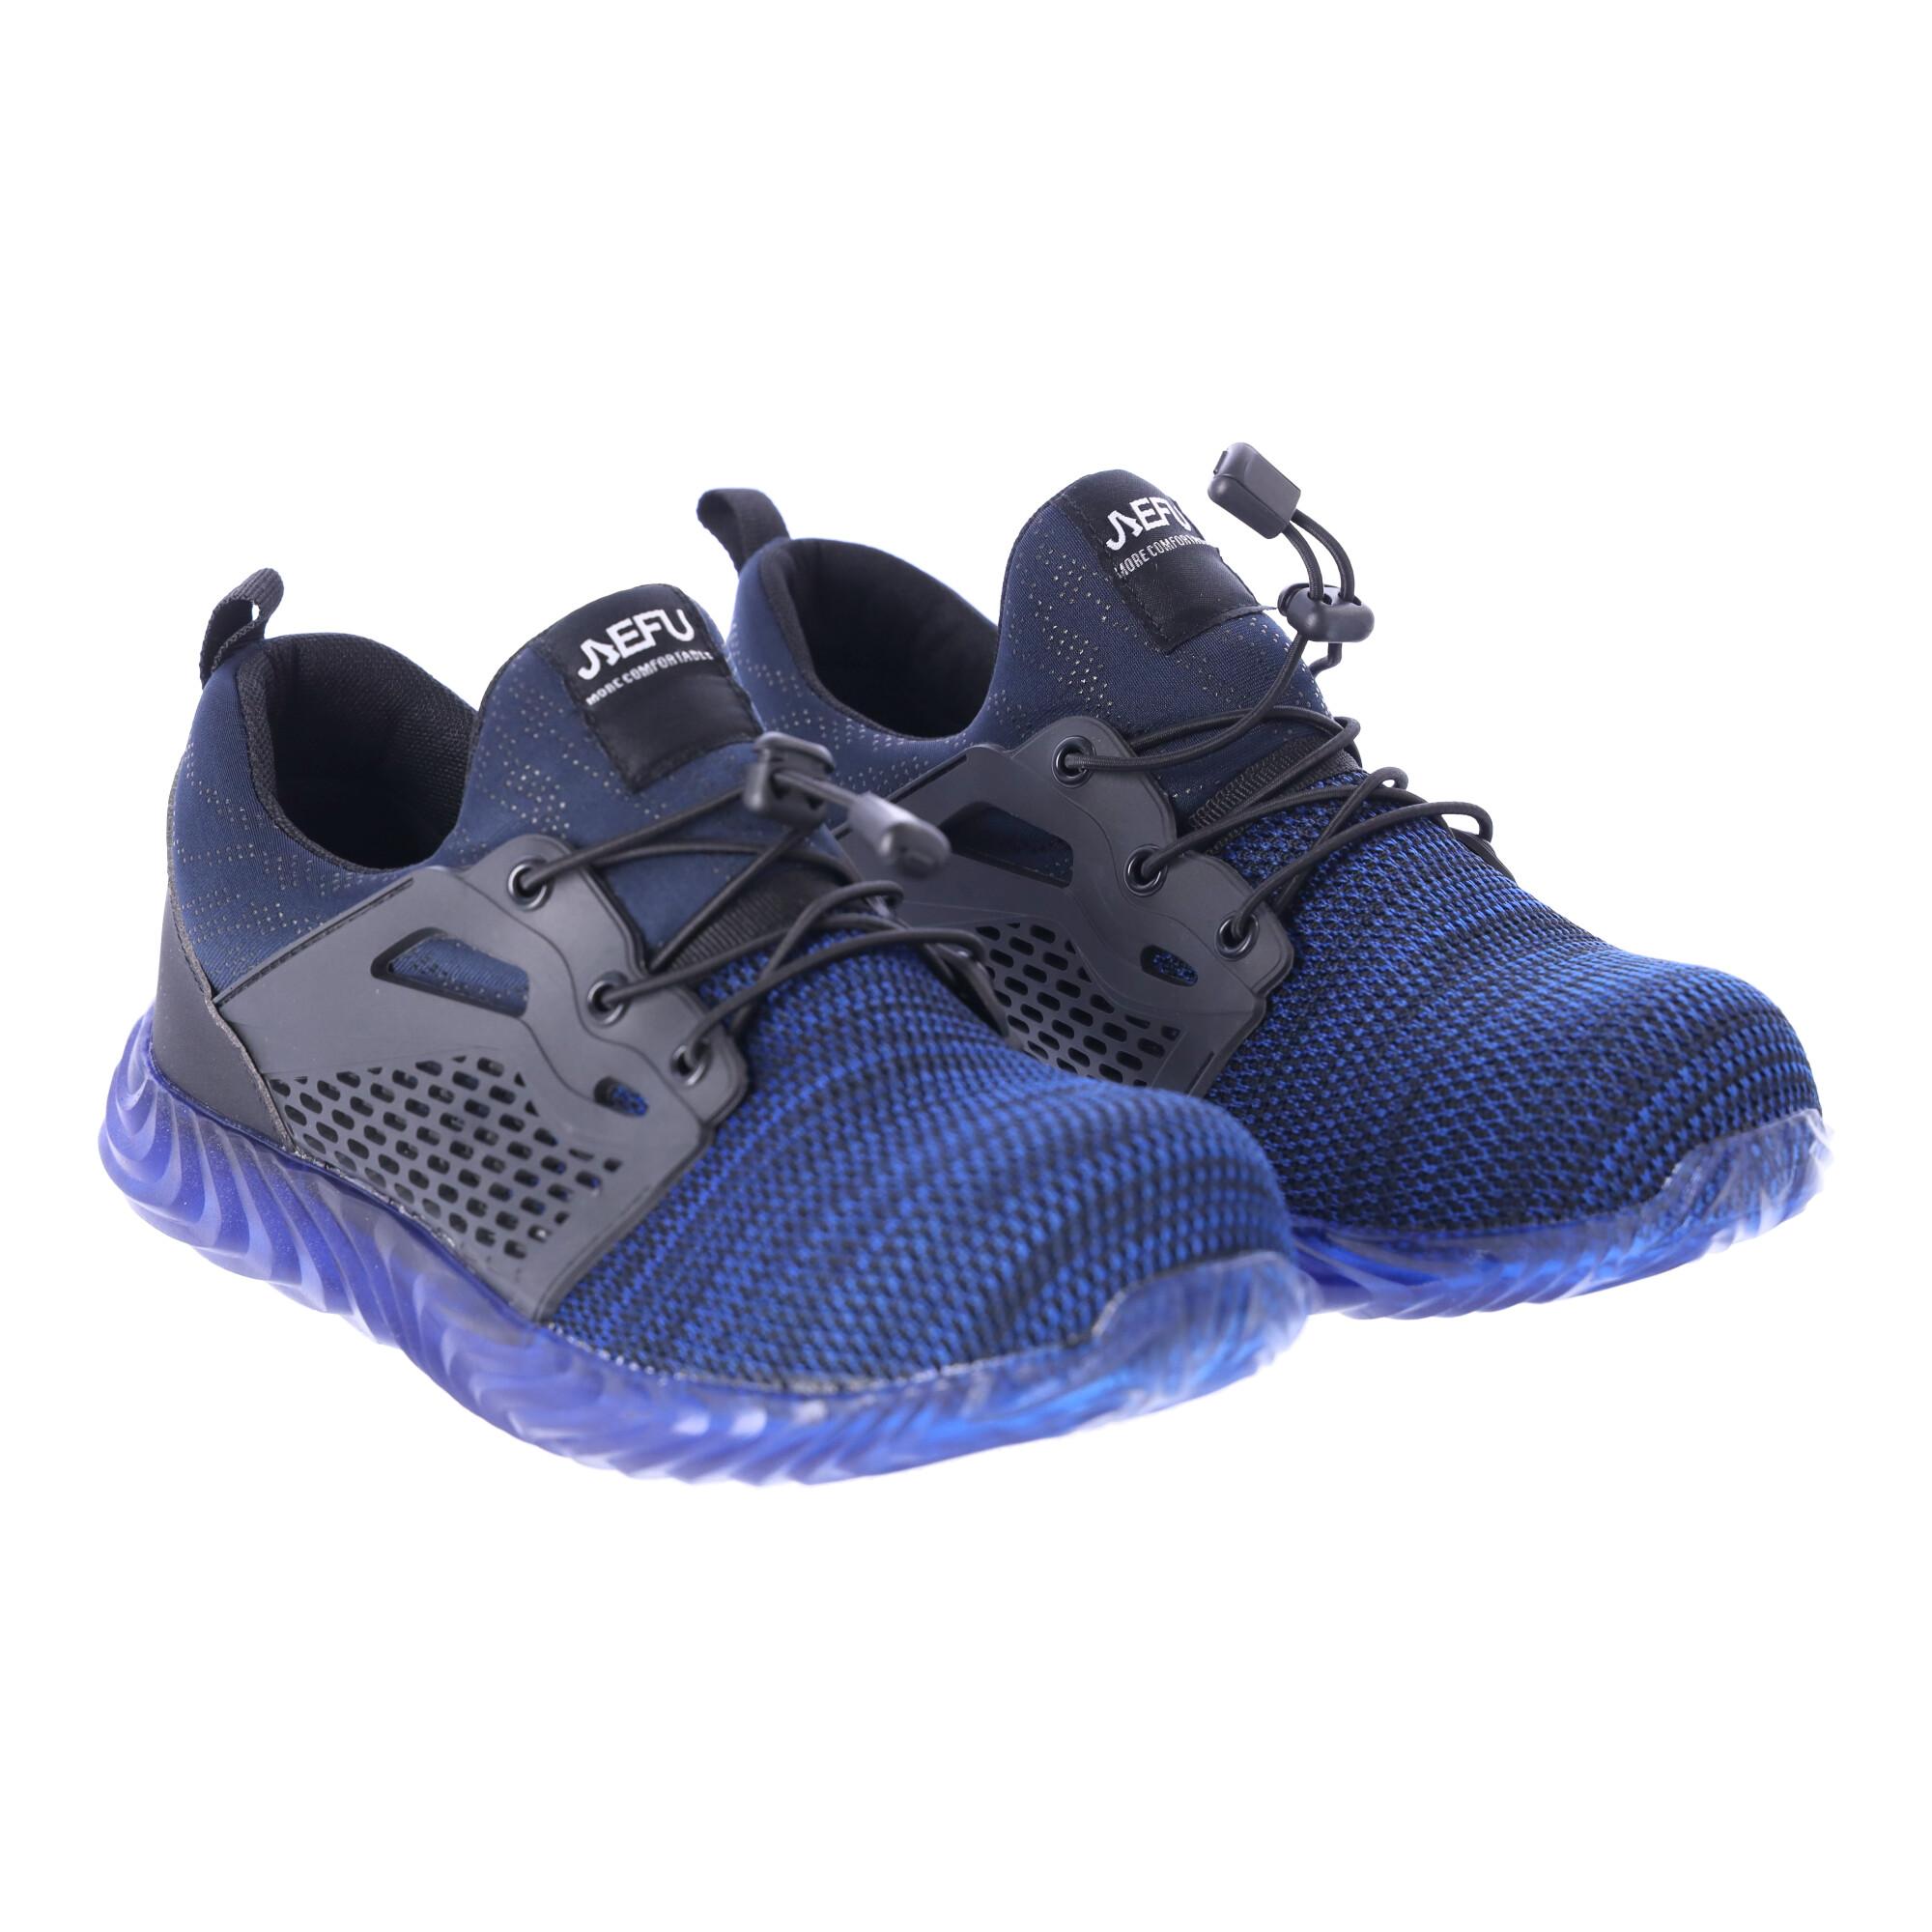 Work safety shoes "43" - navy blue